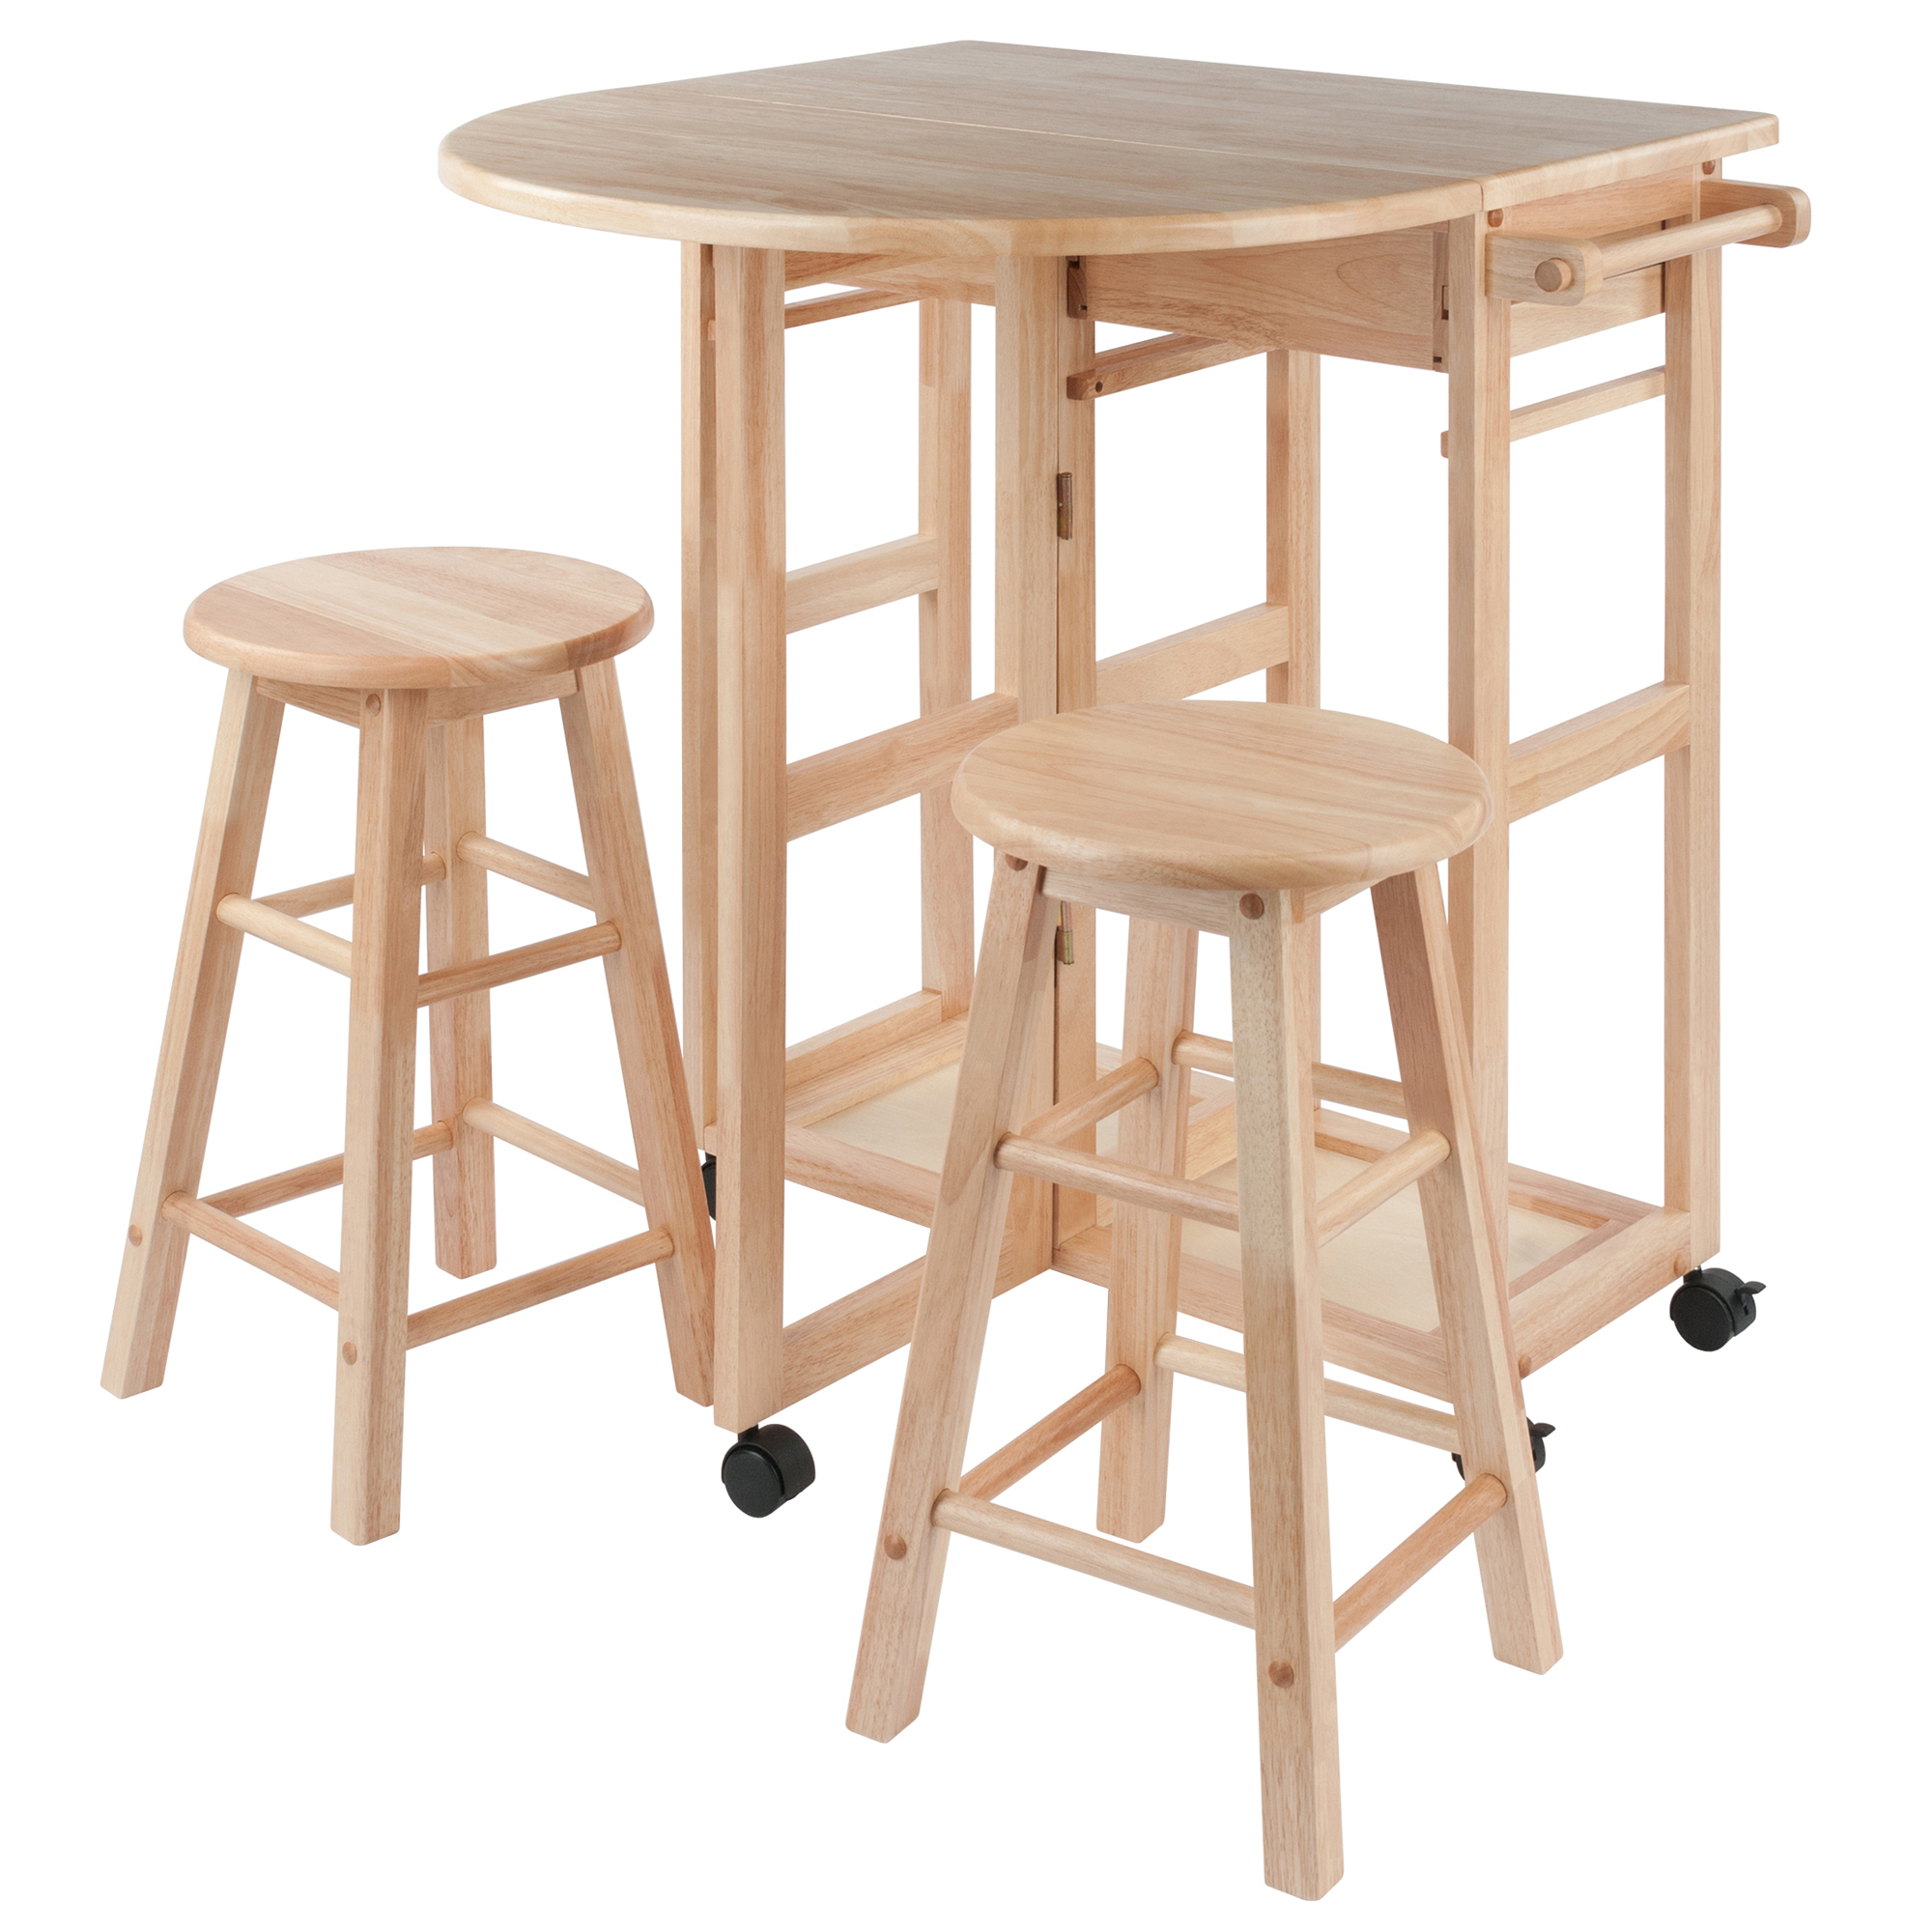 Winsome Wood Burnett 3-Pc Space Saver Set, 2 Tuck - away Stools, Natural Finish - image 1 of 14